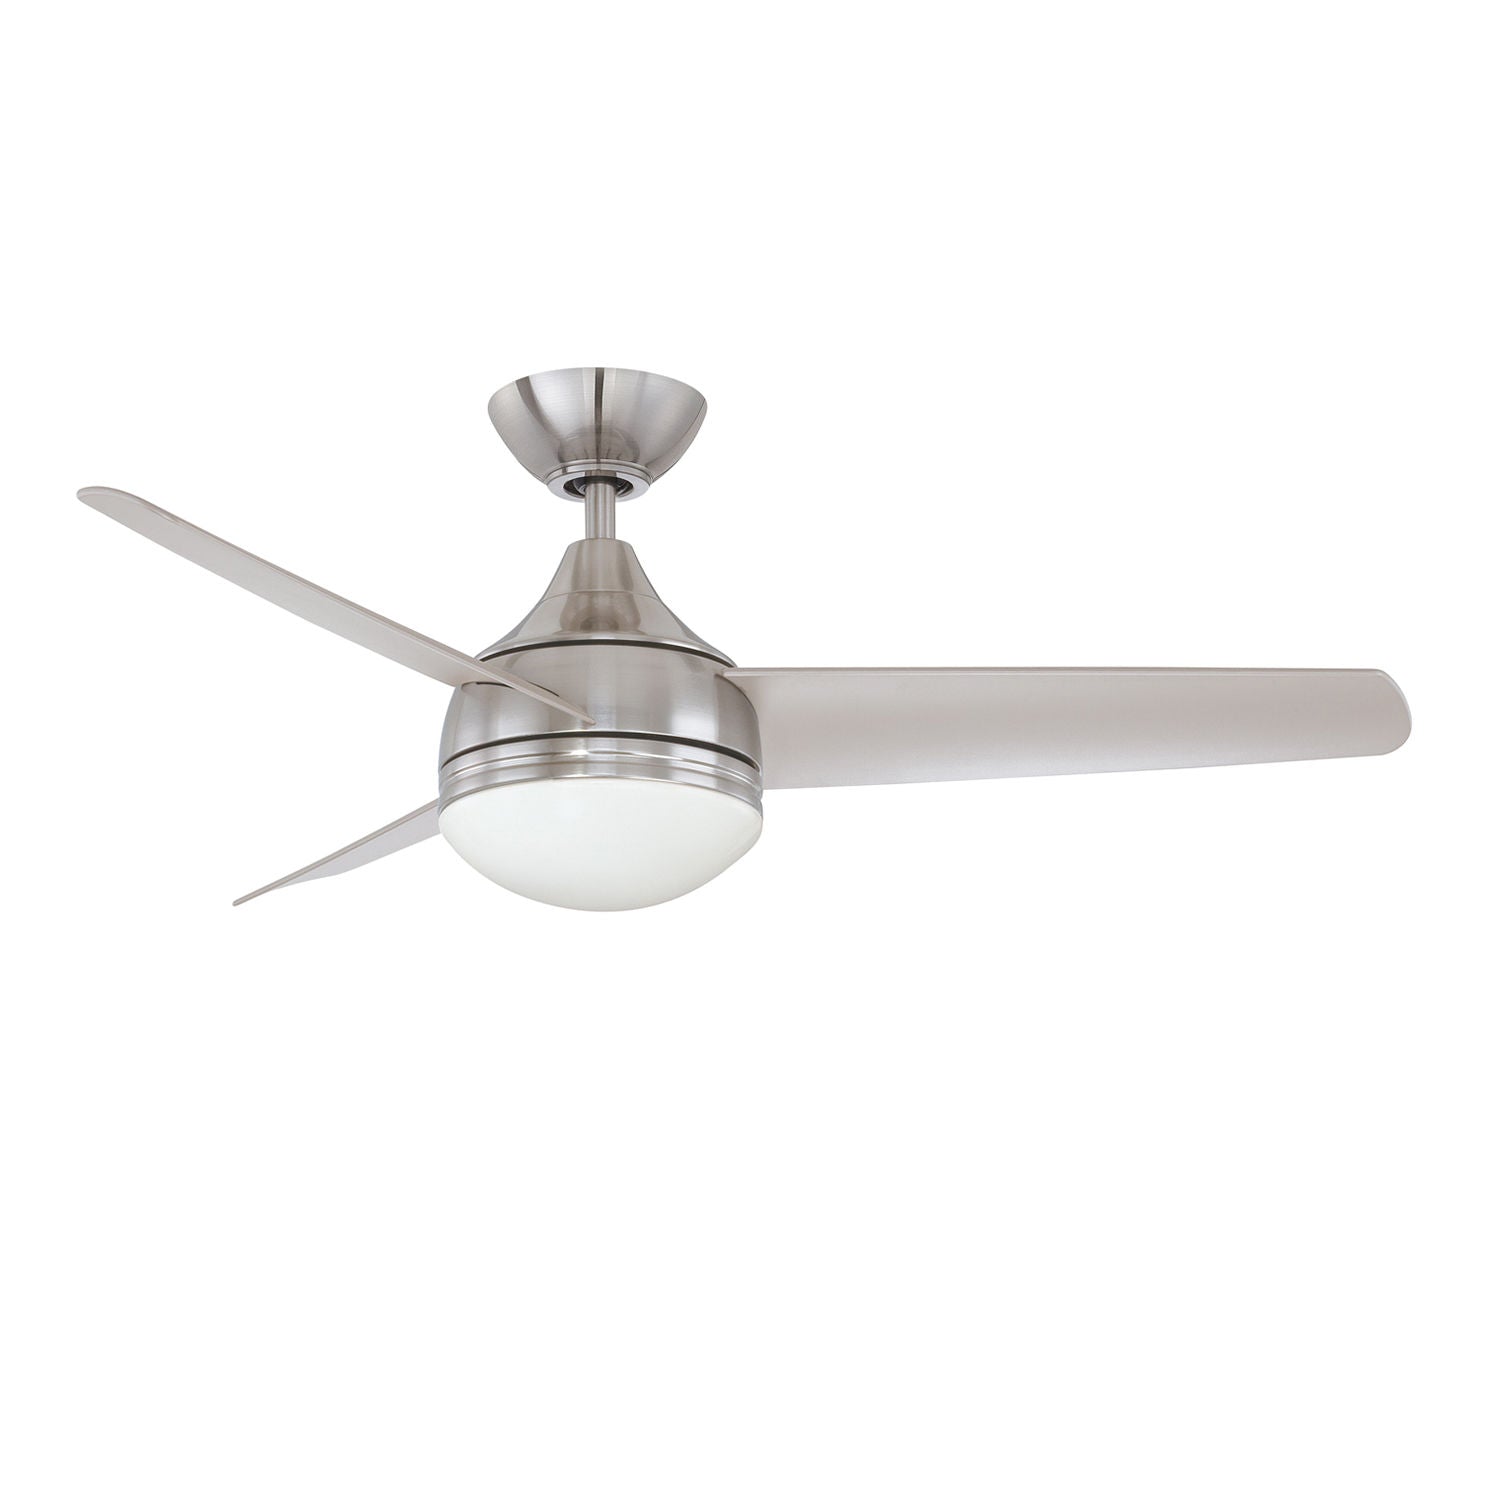 MODERNO LED Ceiling fan Stainless steel INTEGRATED LED - AC19242L-SN | KENDAL